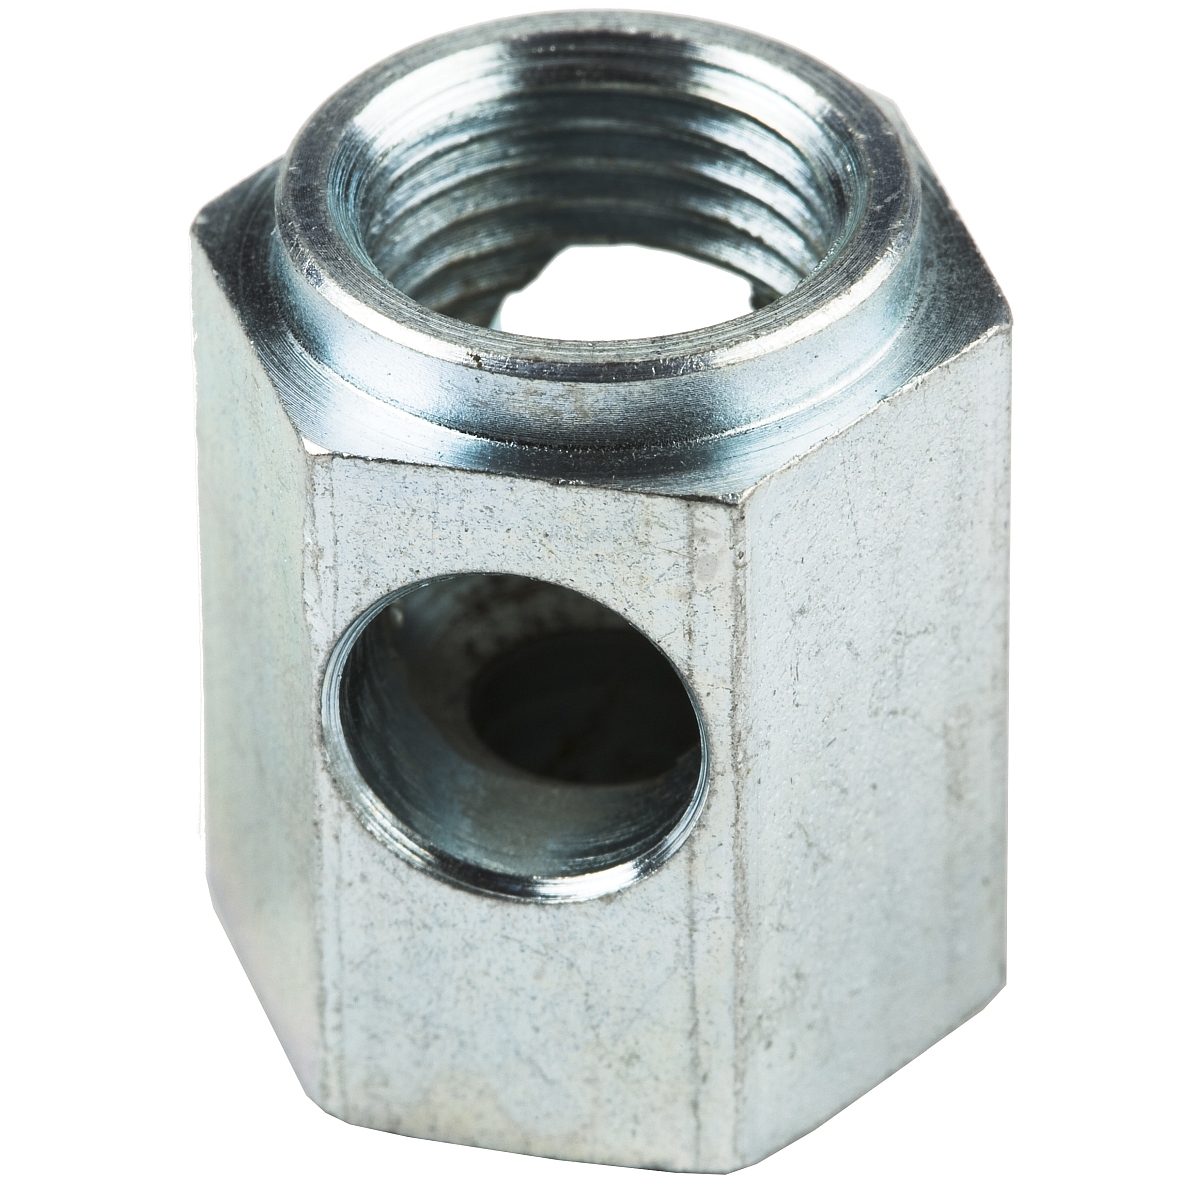 Picture of Brompton Chain Tensioner Nut for 3-speed Sturmey Archer